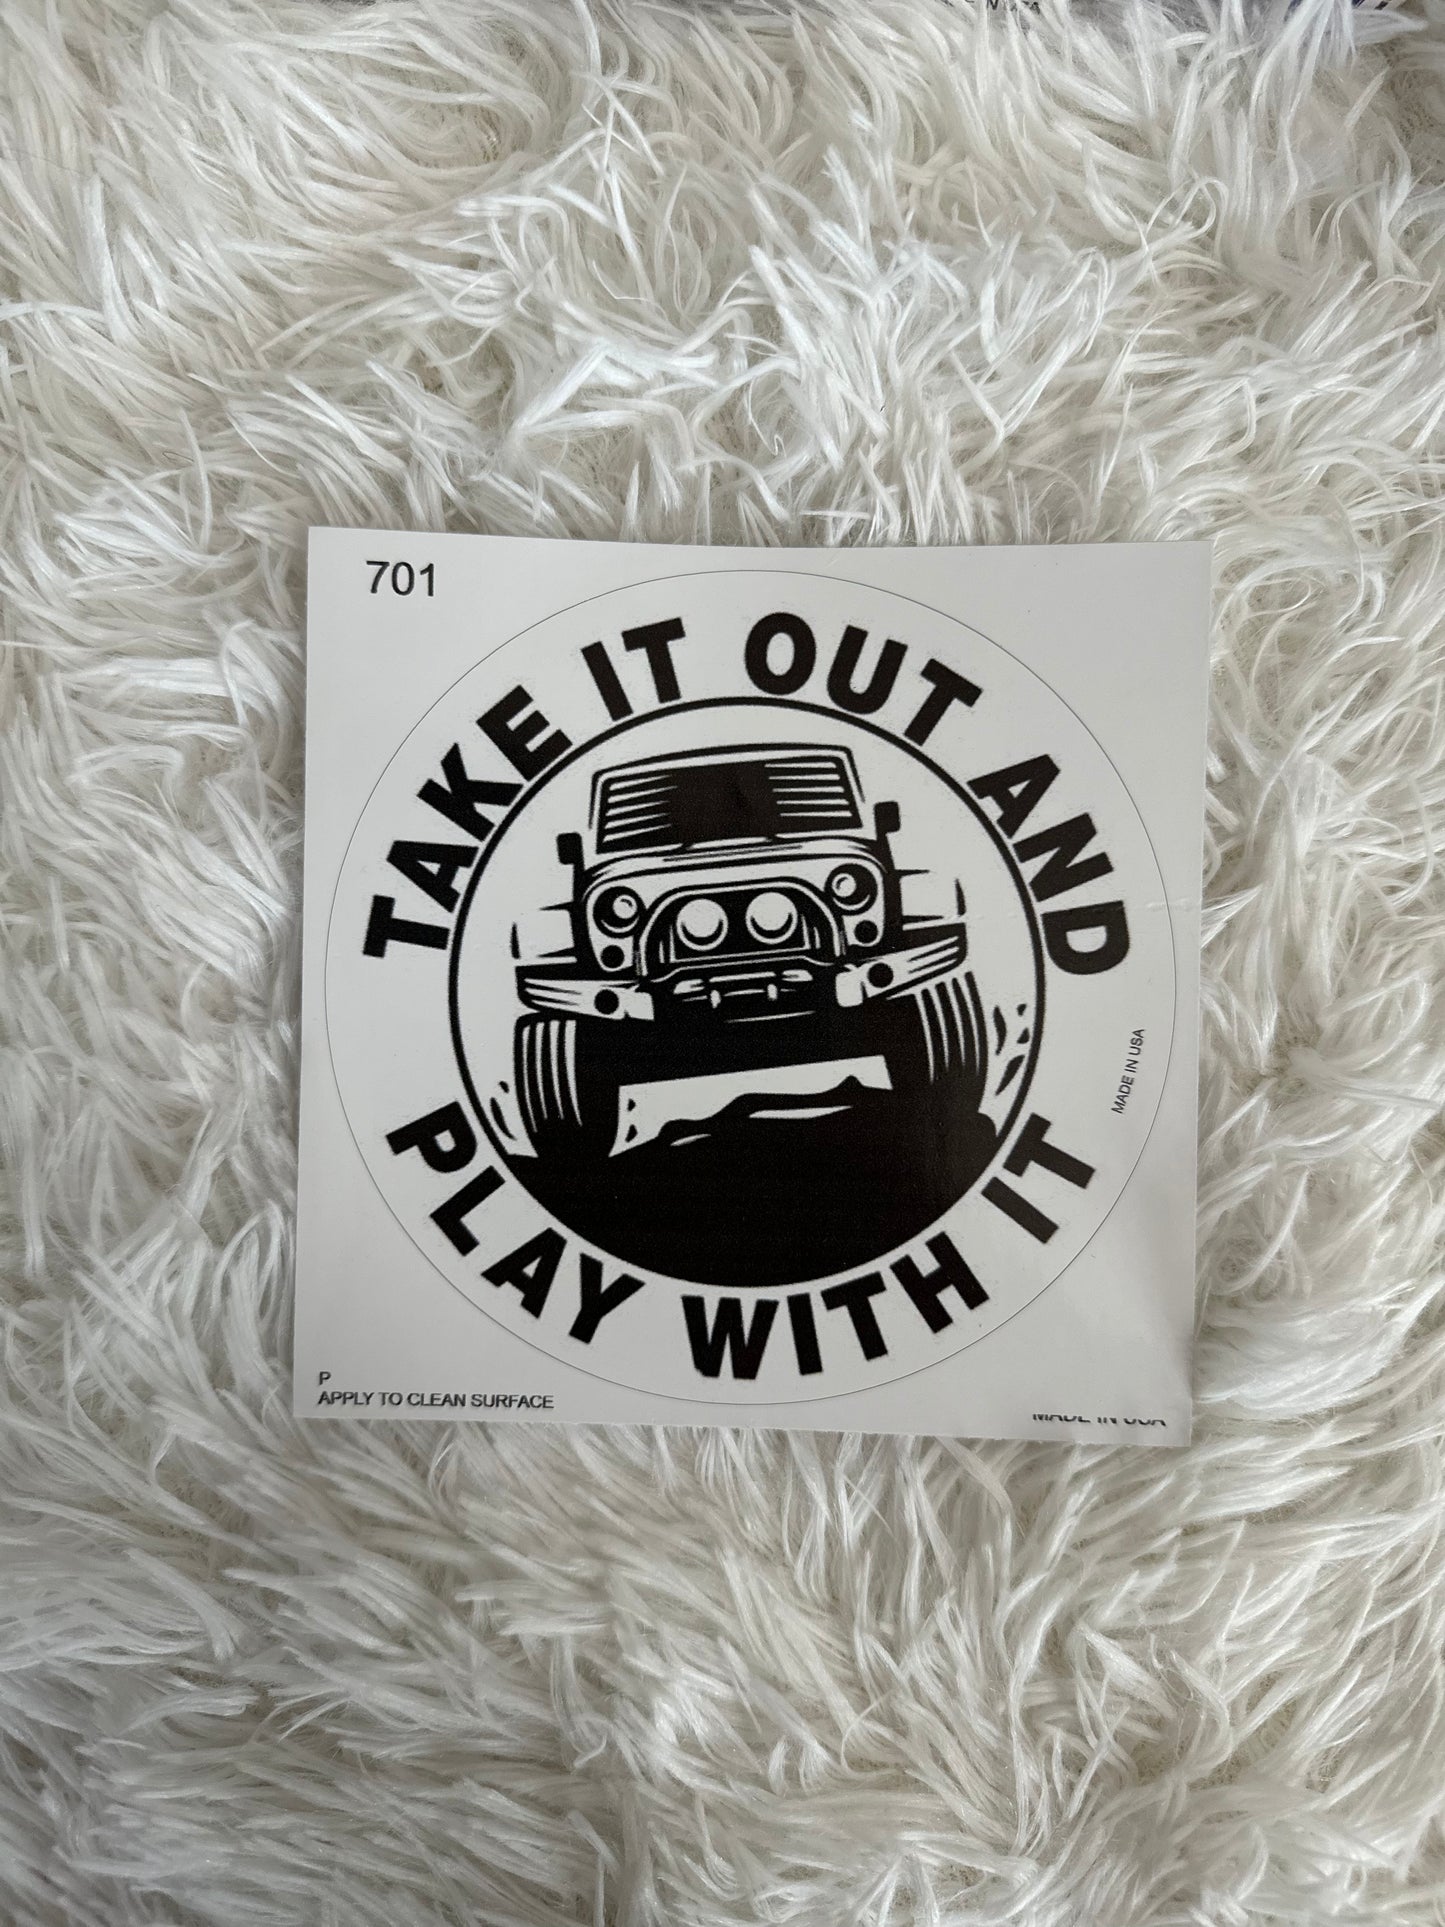 TAKE IT OUT AND PLAY WITH IT DYE CUT BUMPER/ WINDOW STICKER